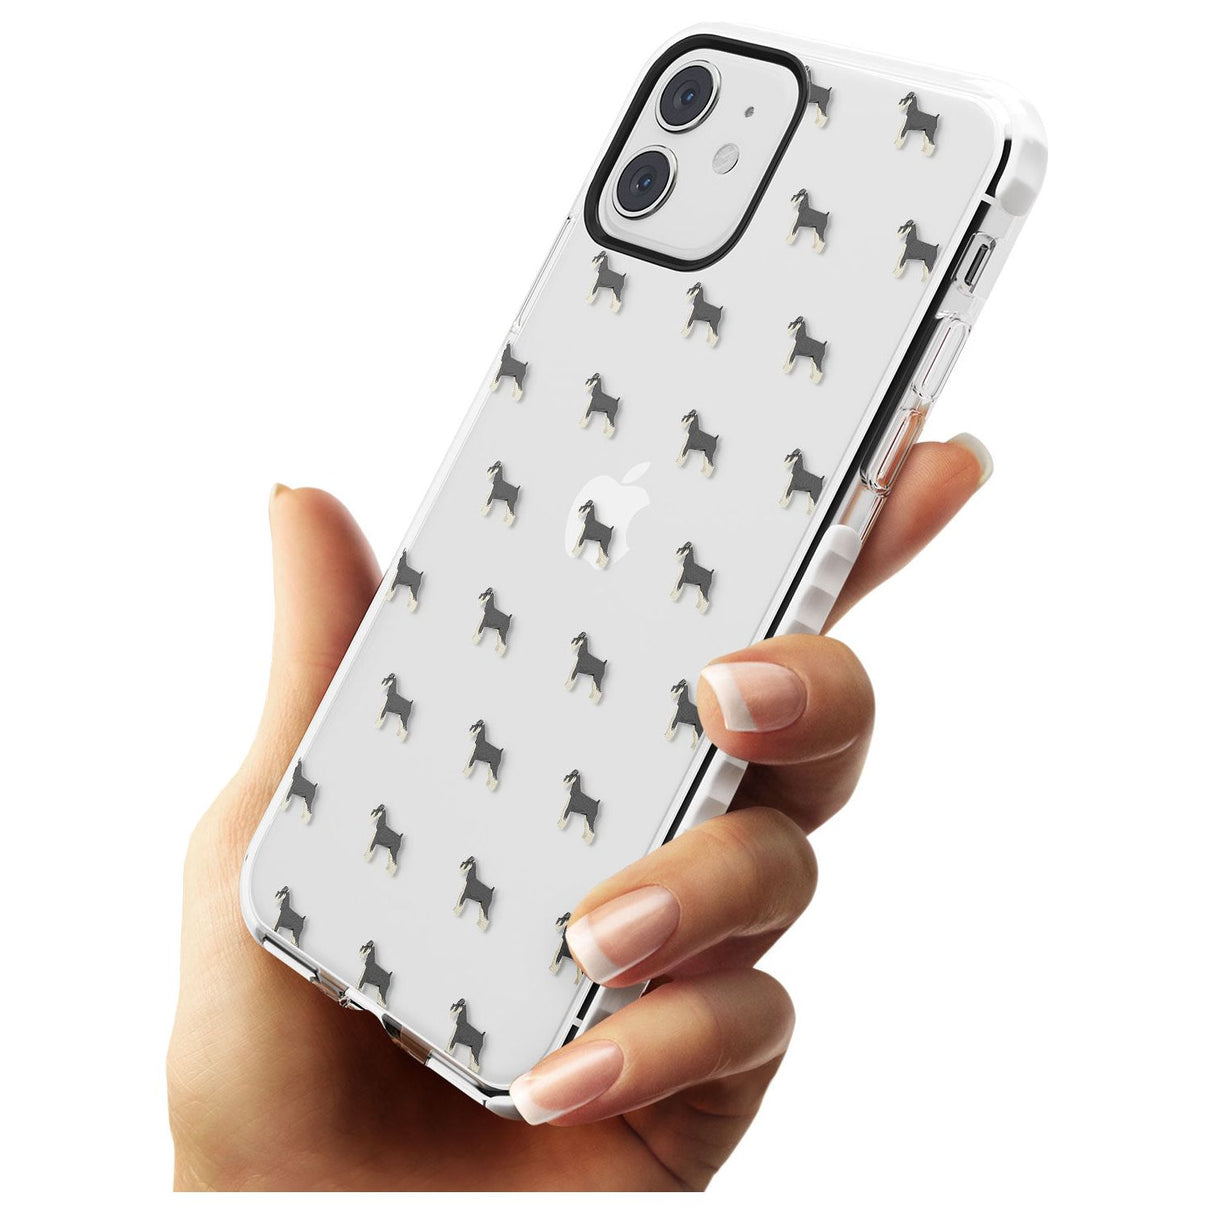 Schnauzer Dog Pattern Clear Impact Phone Case for iPhone 11